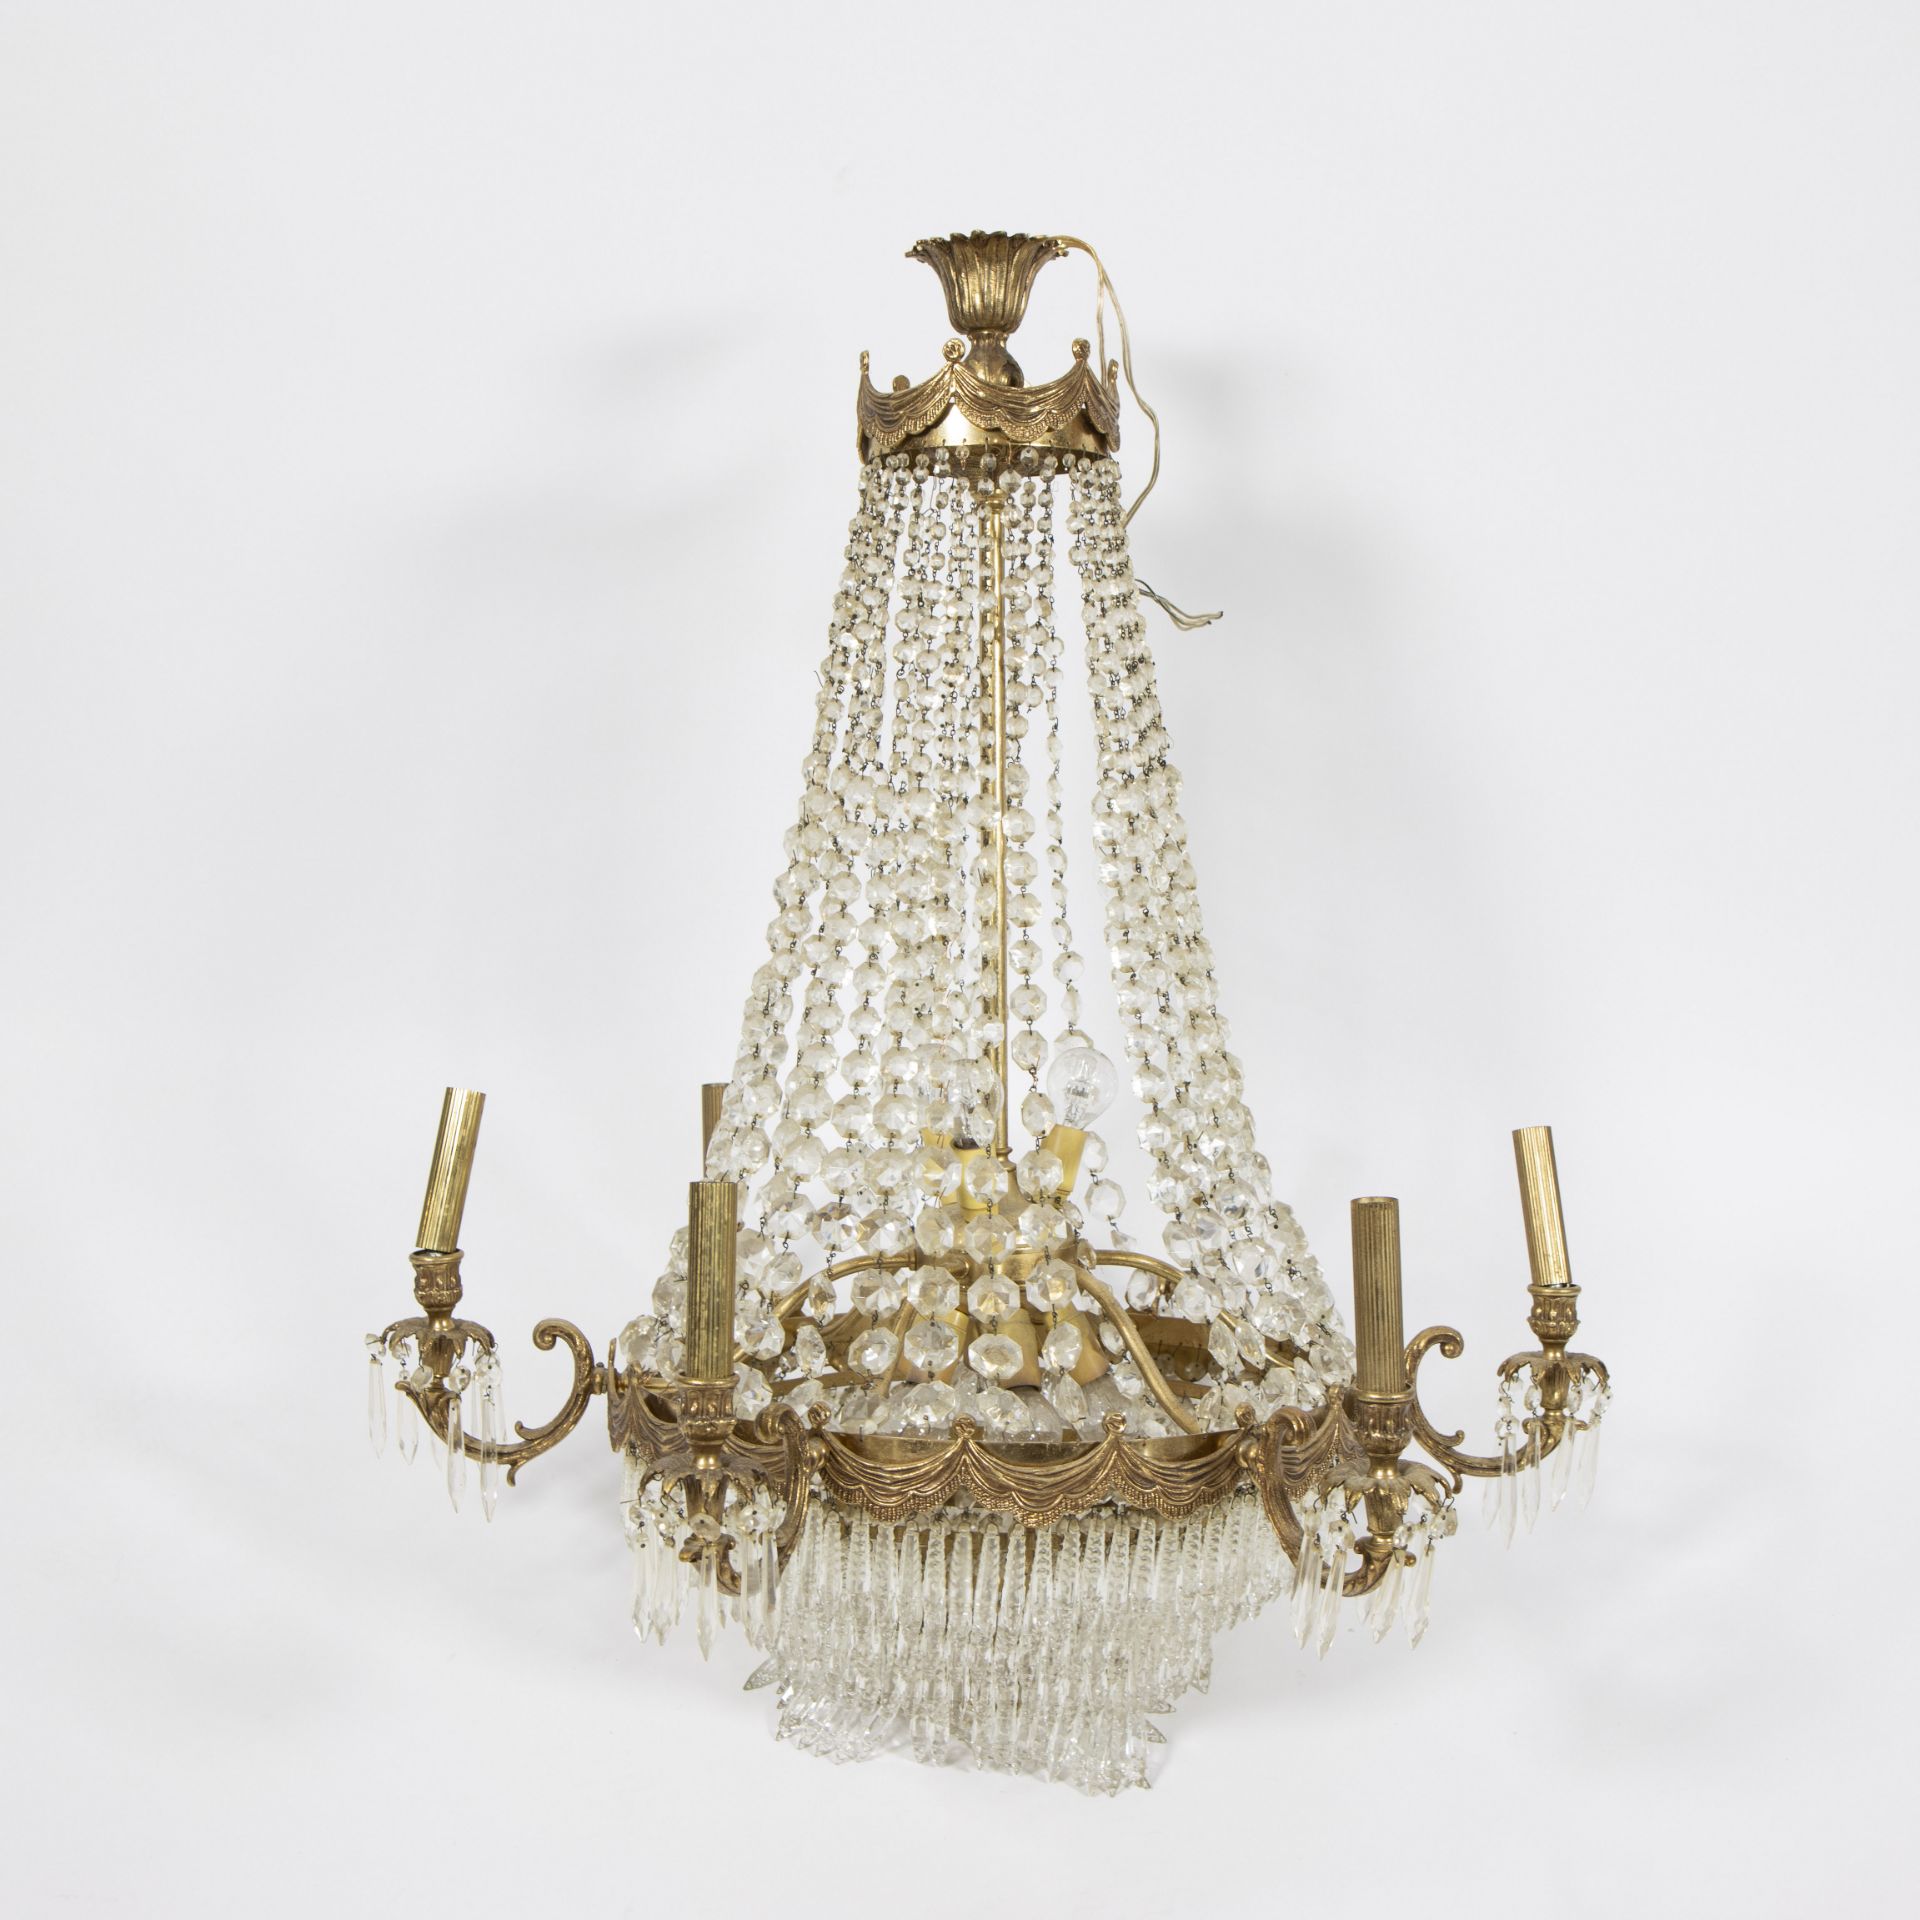 Pocket chandelier or sac à perle, from the top of the lamp, the crown, strings of beads run to the r